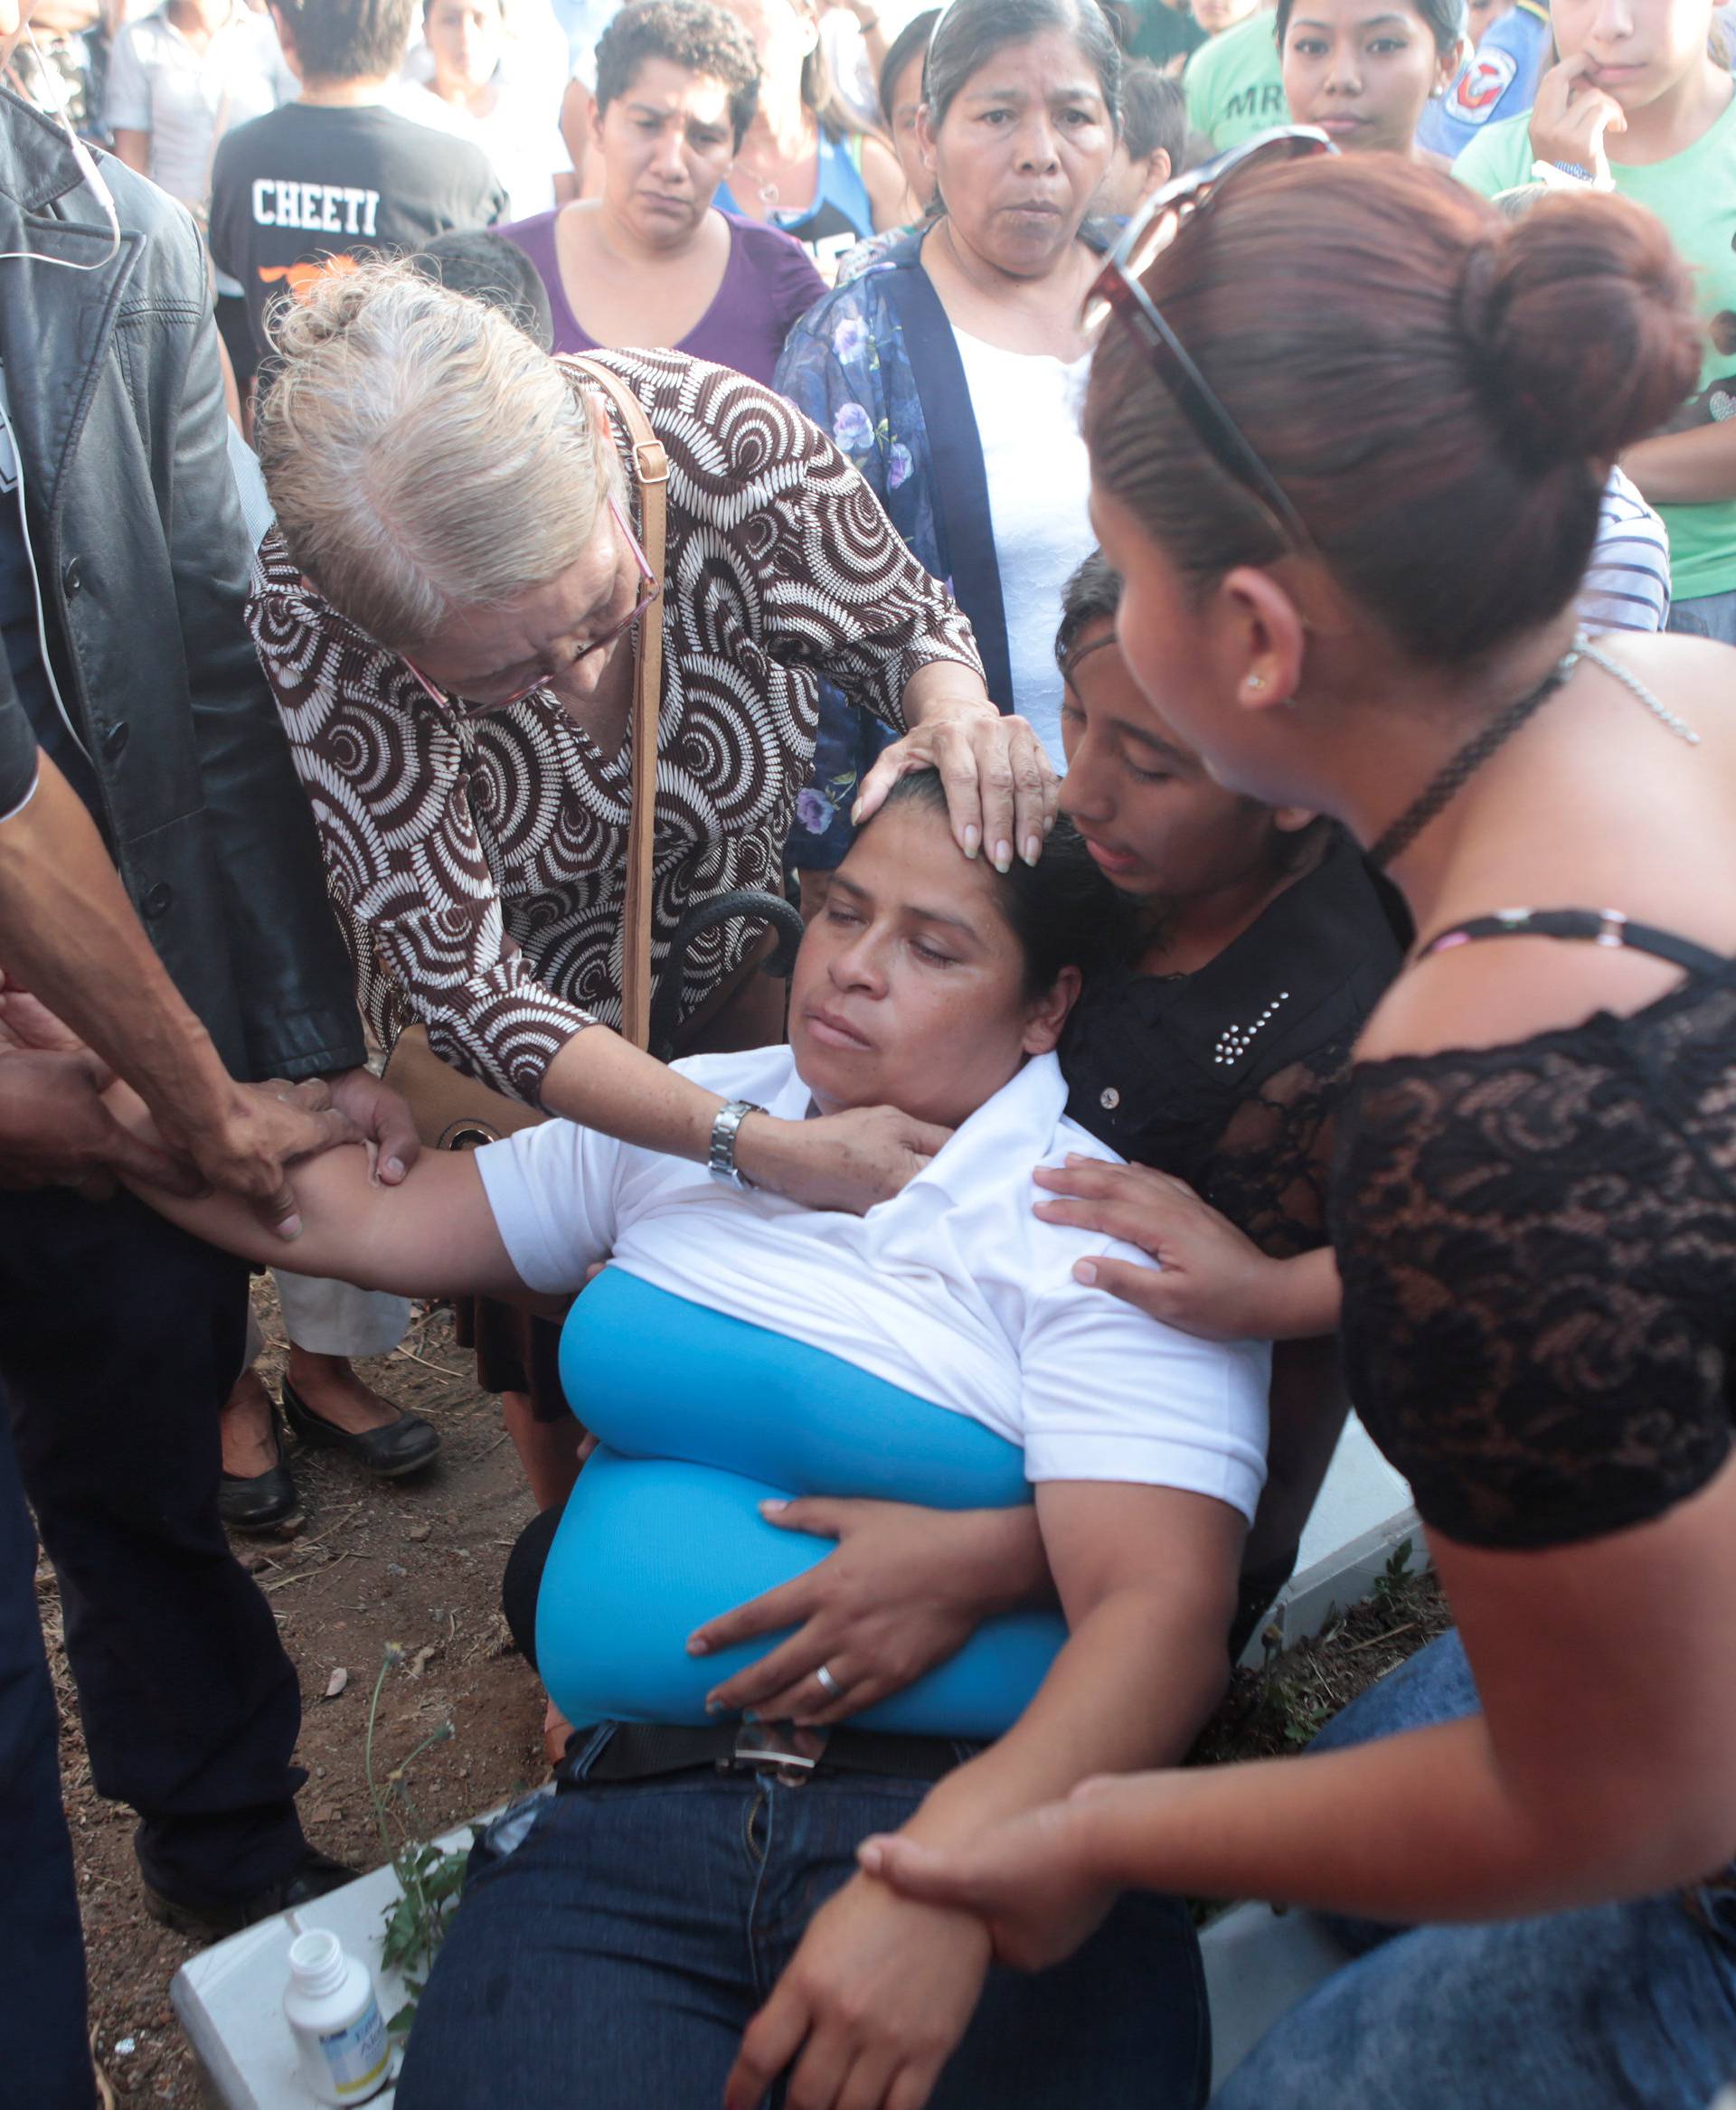 A relative reacts during the funeral of Juana Aguilar, a police officer who died from injury sustained during the protests over a reform to the pension plans of the Nicaraguan Social Security Institute, at the cemetery in Jinotepe